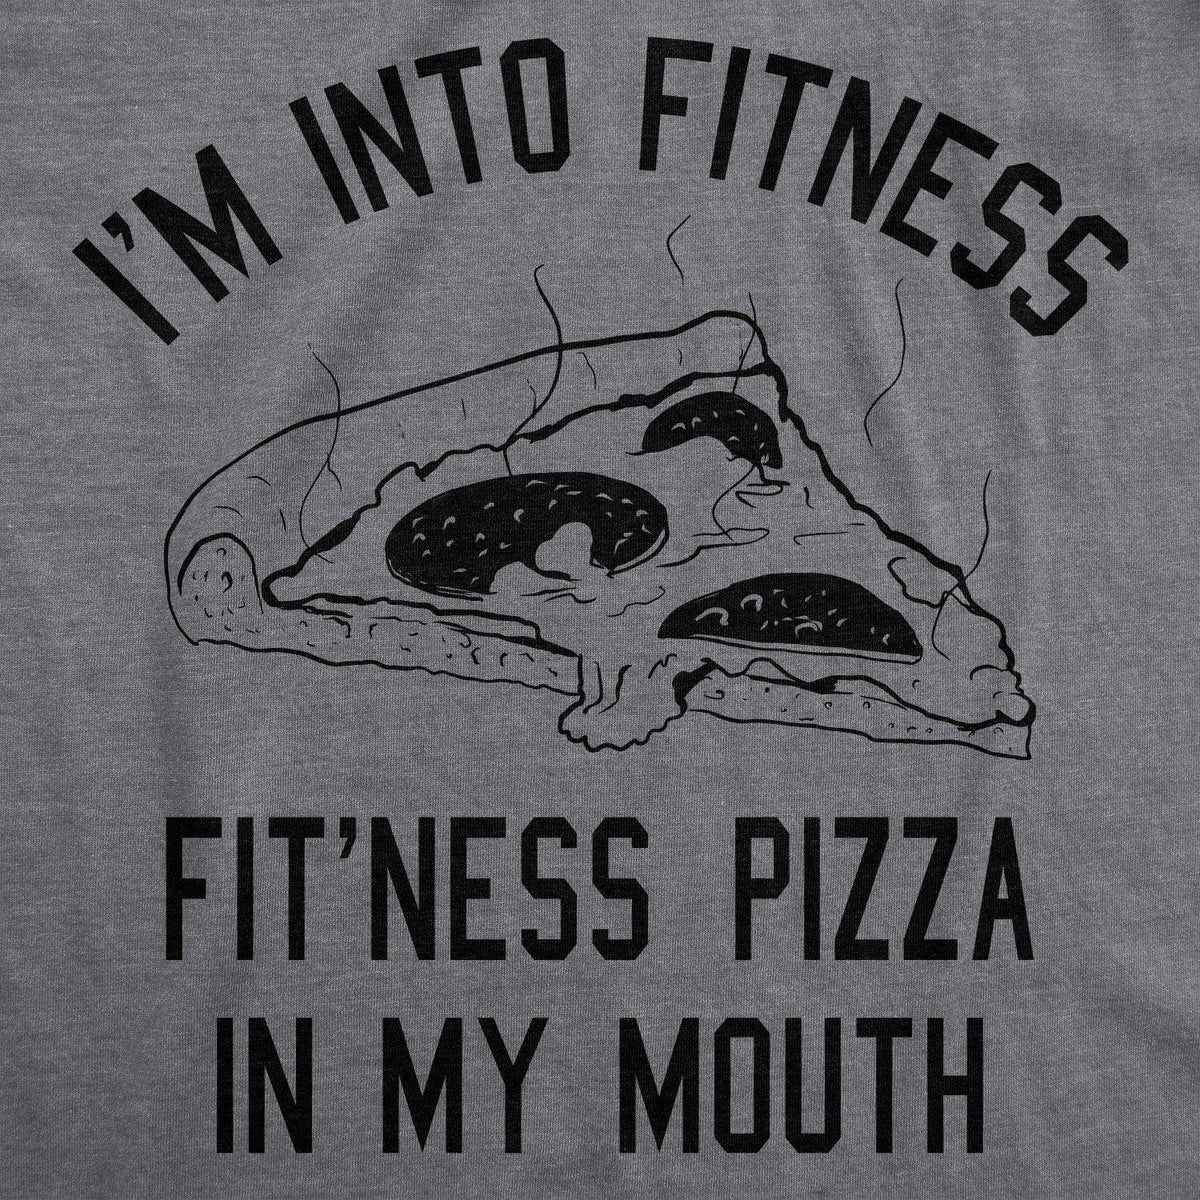 Fitness Pizza In My Mouth Men&#39;s Tshirt  -  Crazy Dog T-Shirts